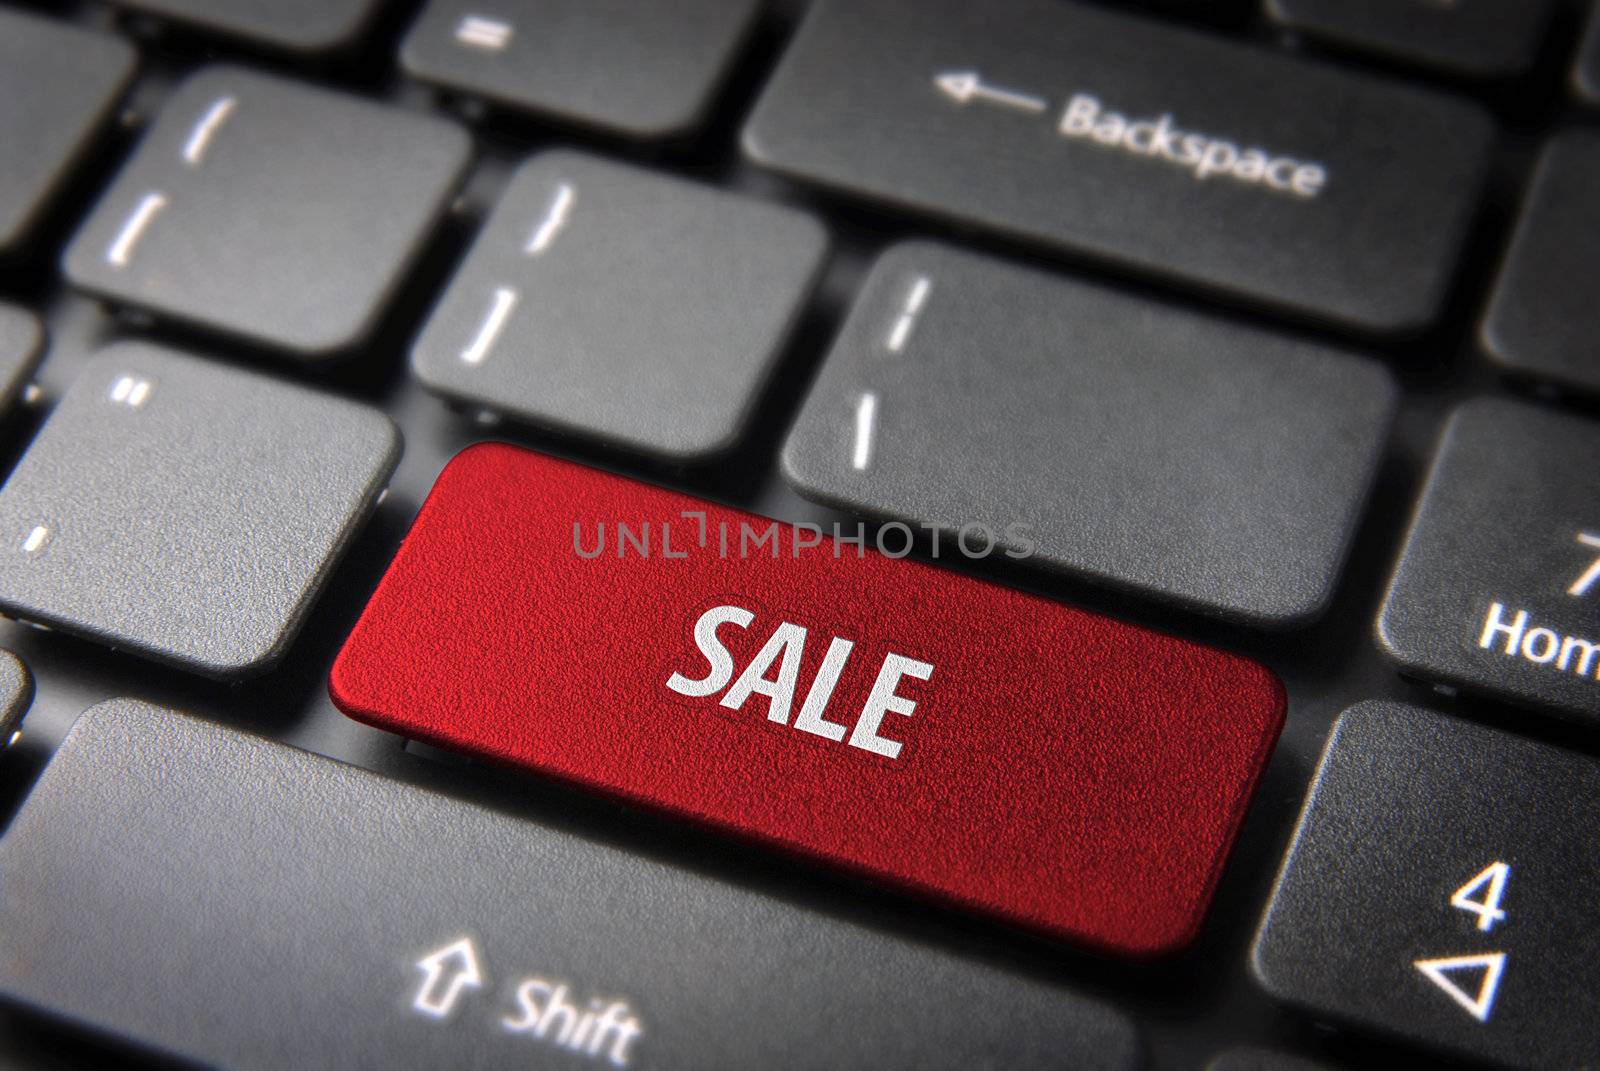 Online shopping season offer: red button with sale text on laptop keyboard. Included clipping path, so you can easily edit it.